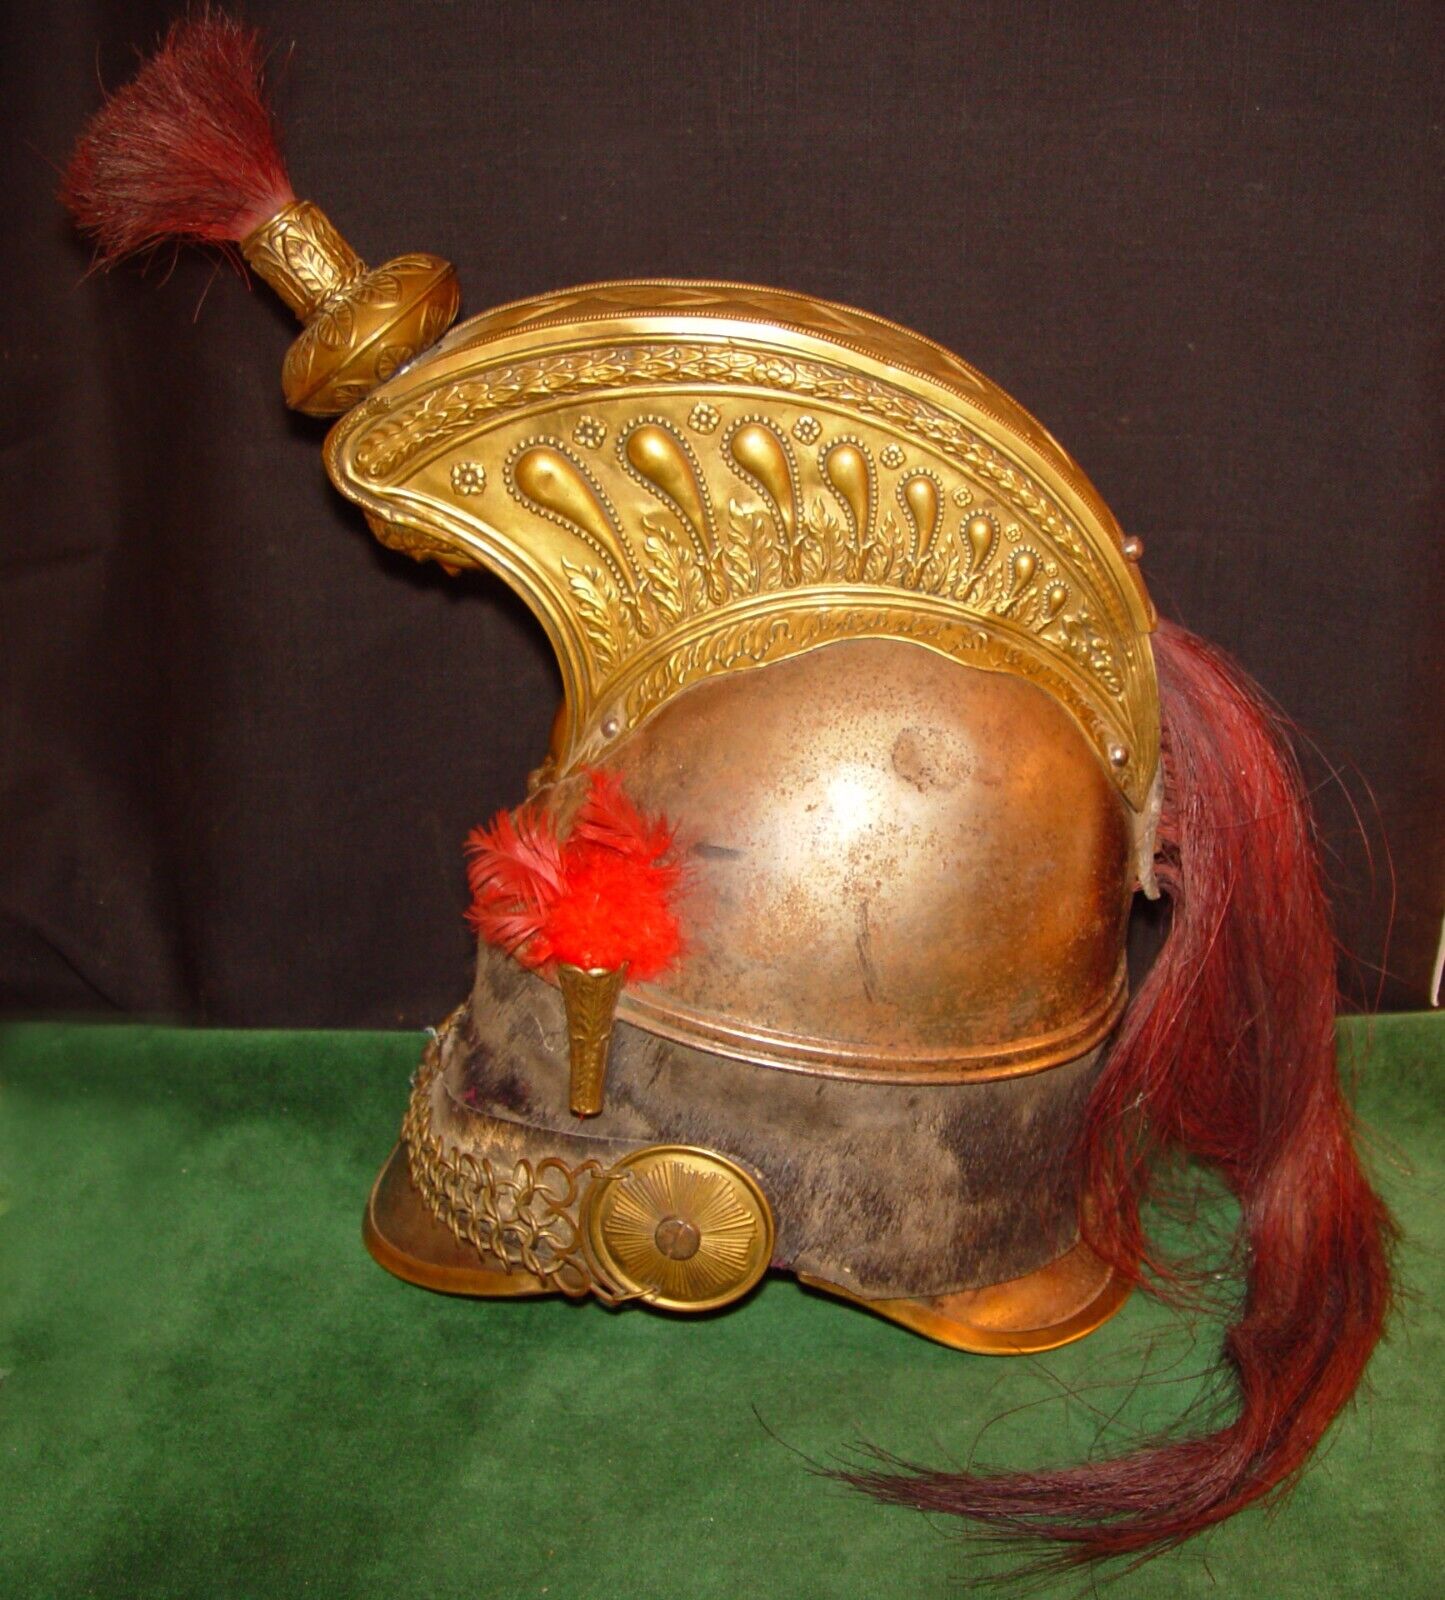 19th Century Napoleonic (or Later) FRENCH Cuirassier / Dragoon Officer\'s Helmet